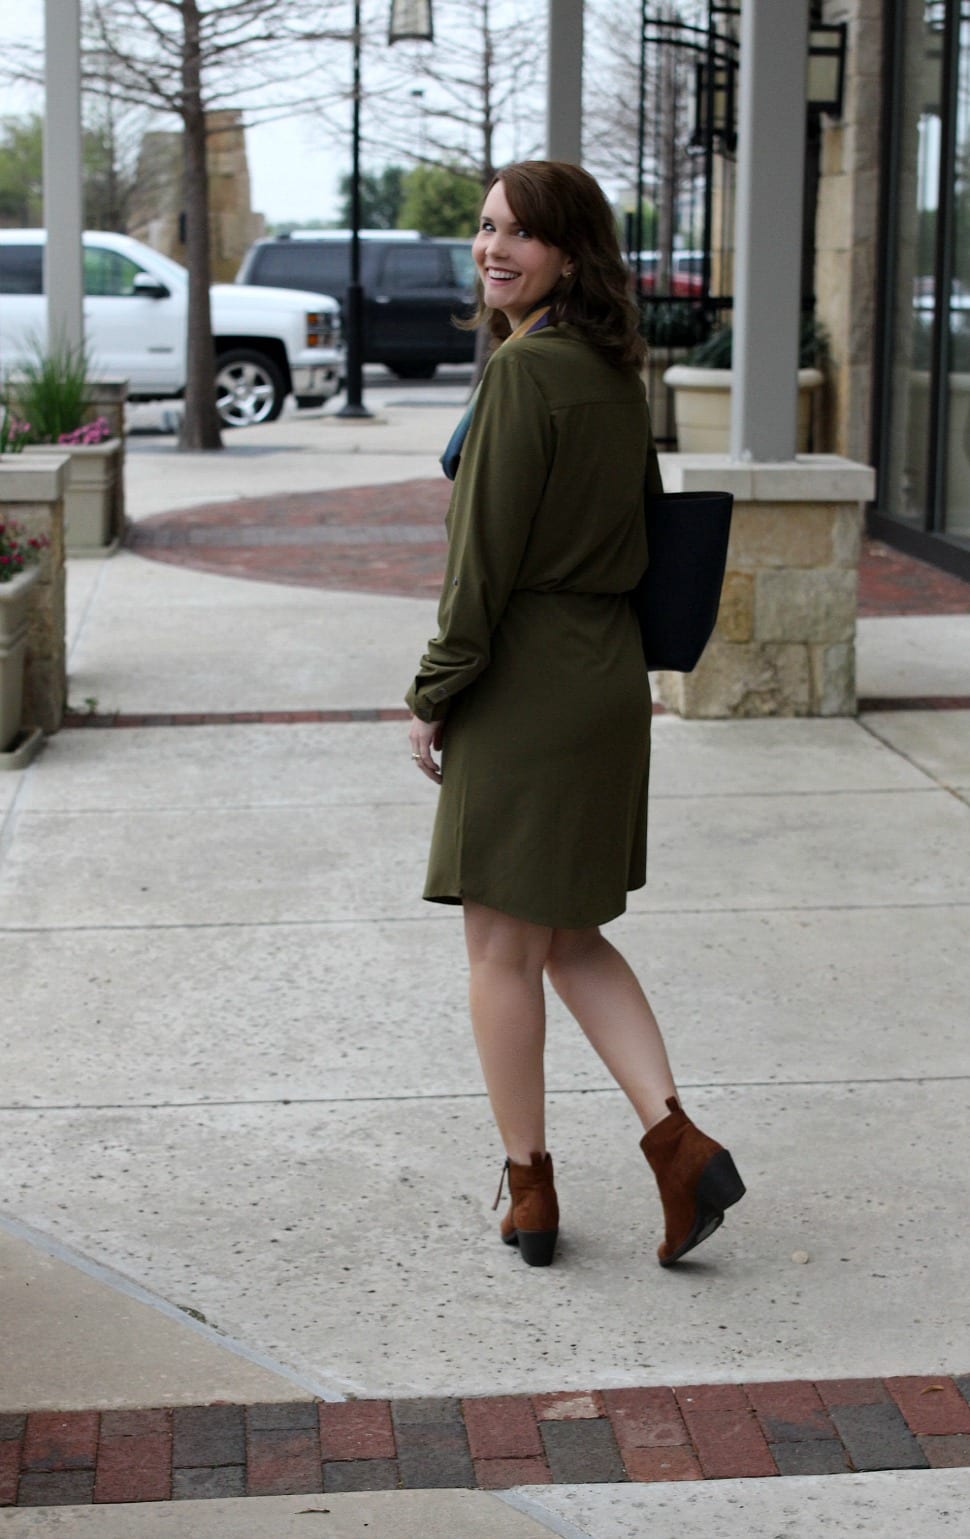 Spring fashion: An olive dress outfit is perfect for these warmer days when you need to run errands, but want to look stylish and stay comfortable.